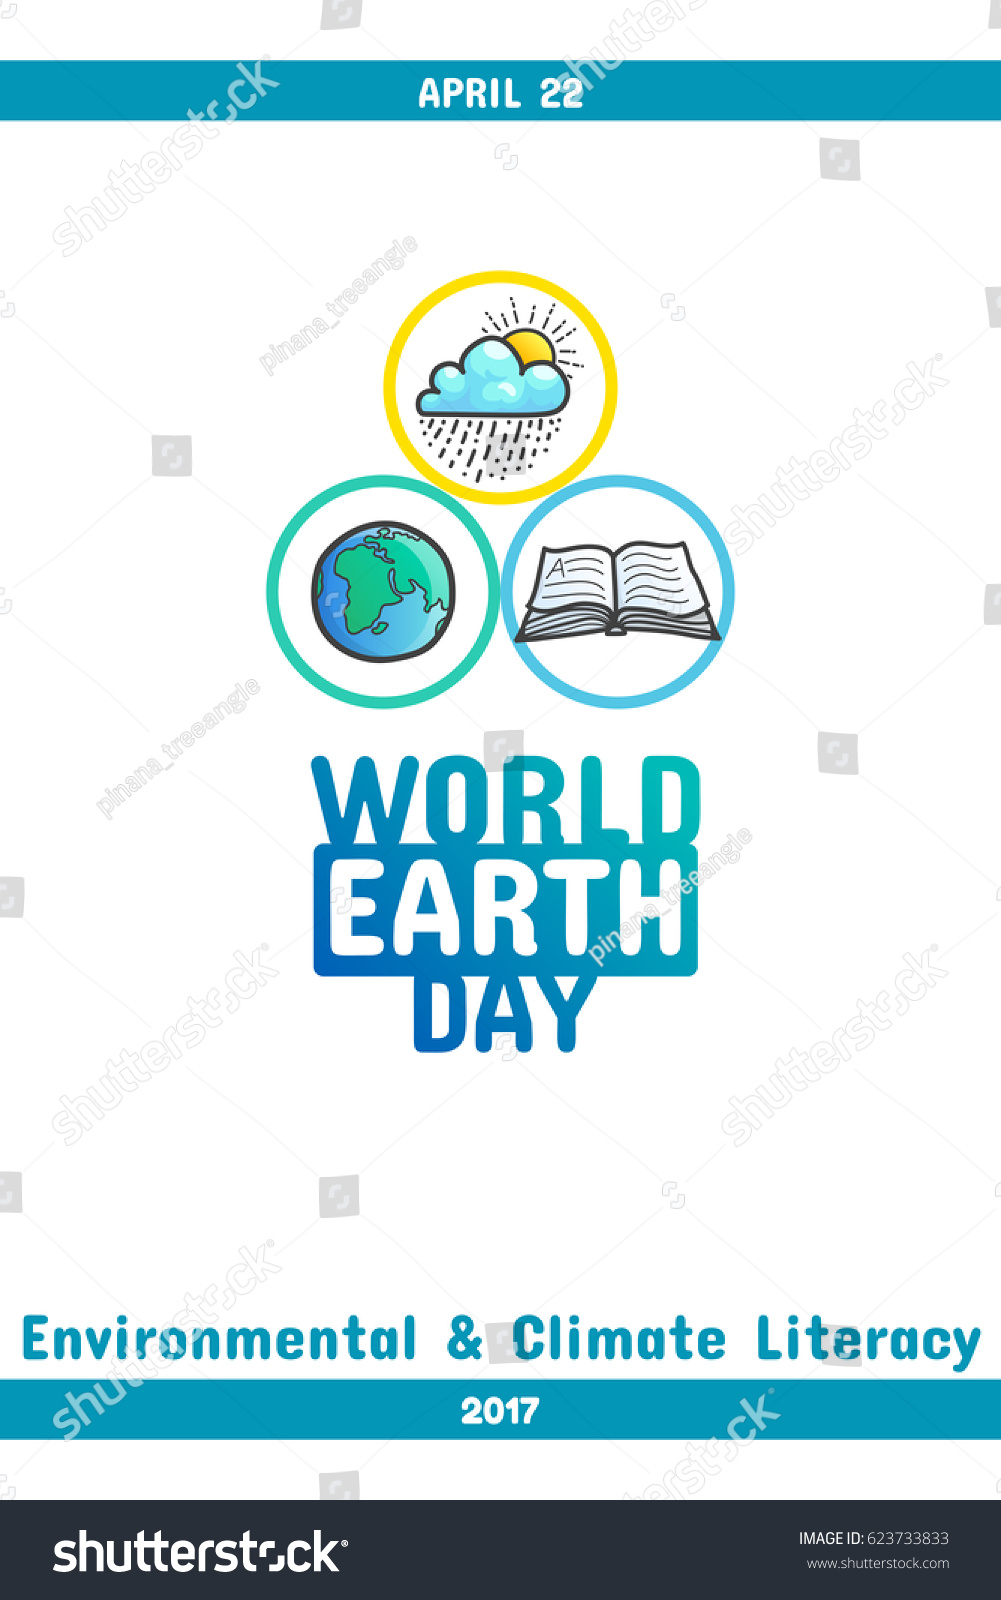 International Earth Day April 22 Event Stock Vector Royalty Free